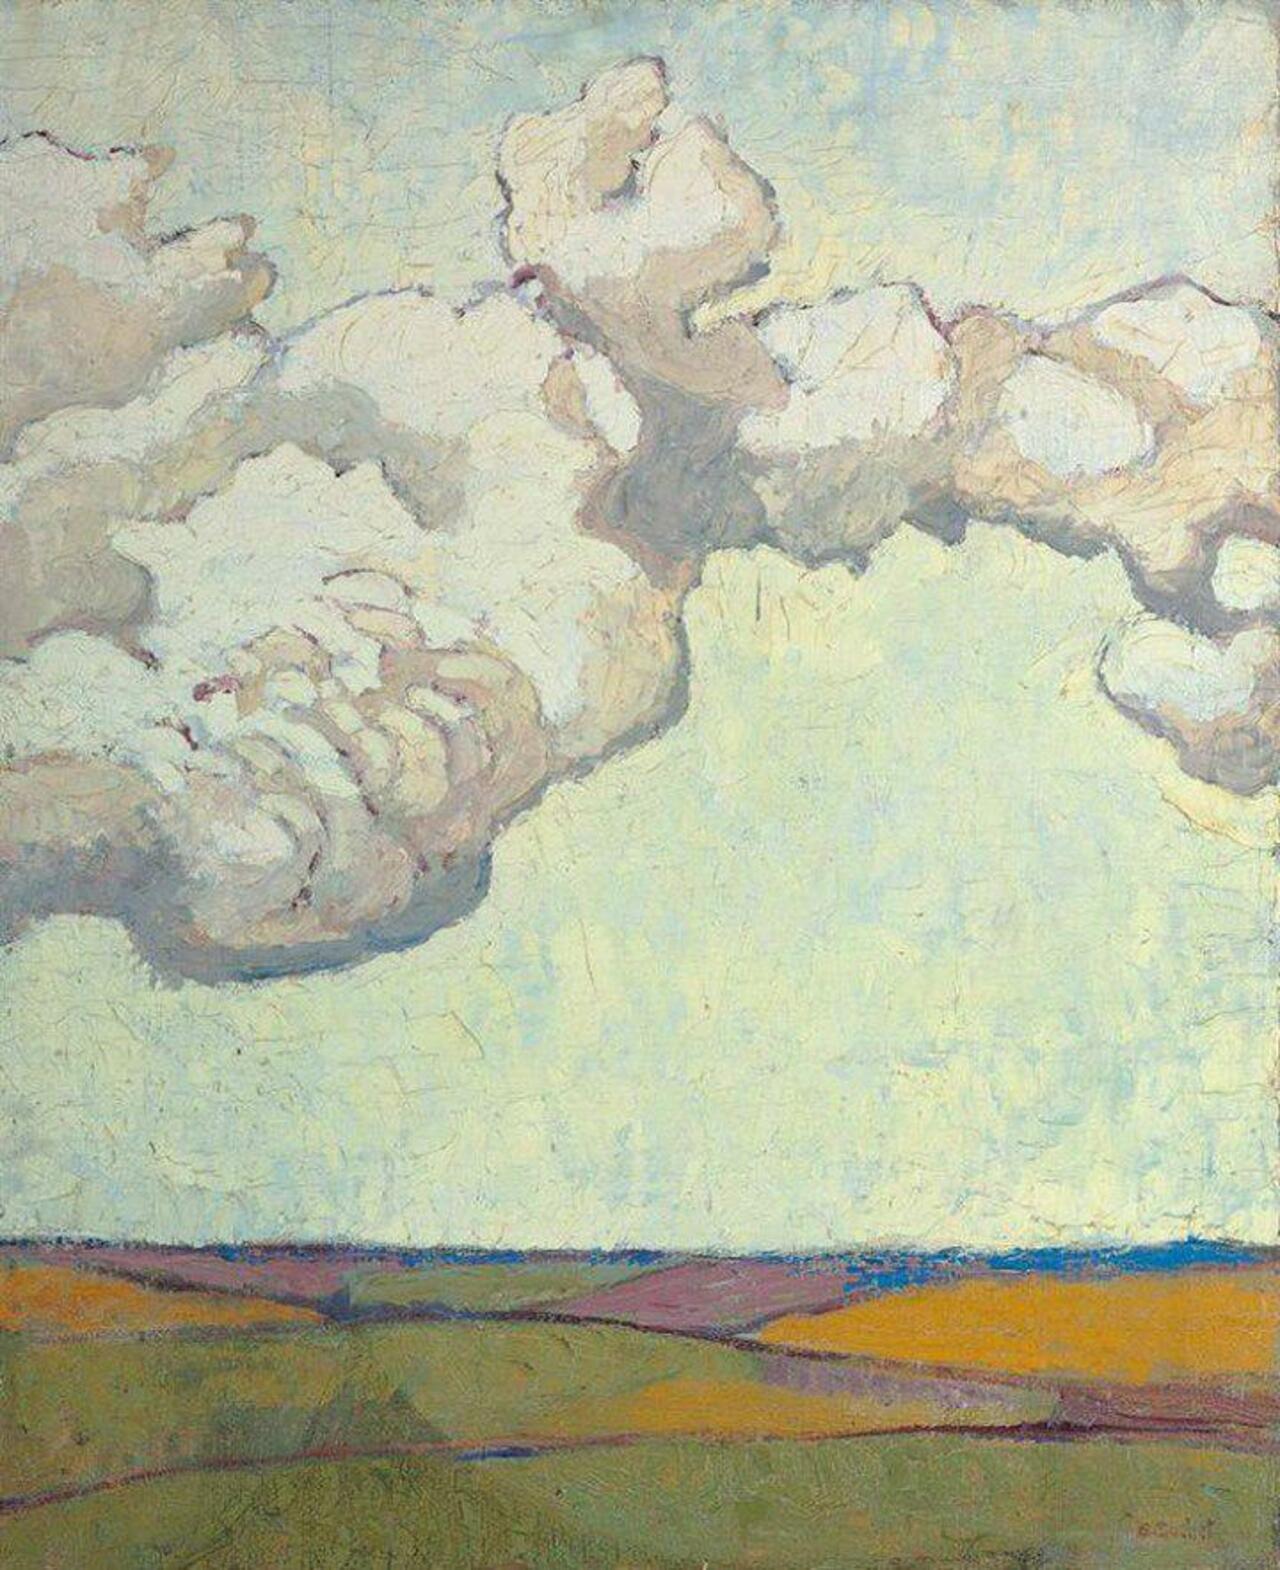 Landscape with Clouds, Gustave #Buchet, 1913. http://t.co/QhsyvoxKHV